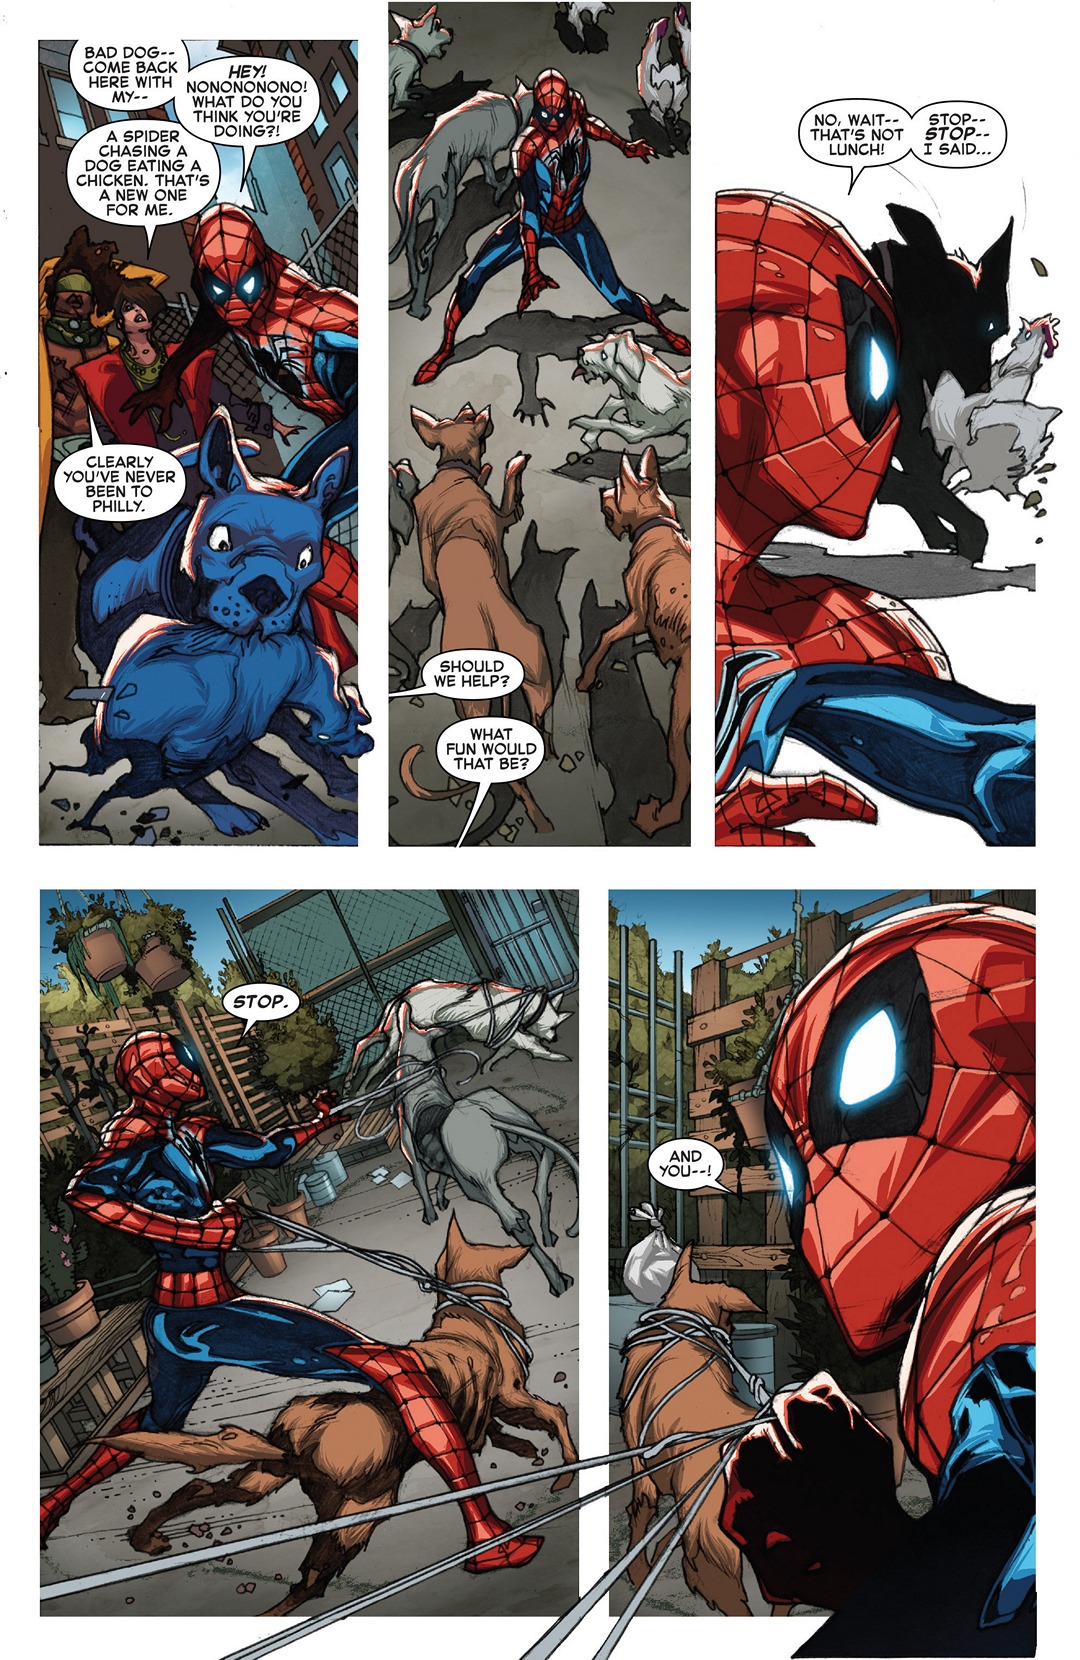 The Amazing Spider-Man (2015-): Chapter 1-2 - Page 4